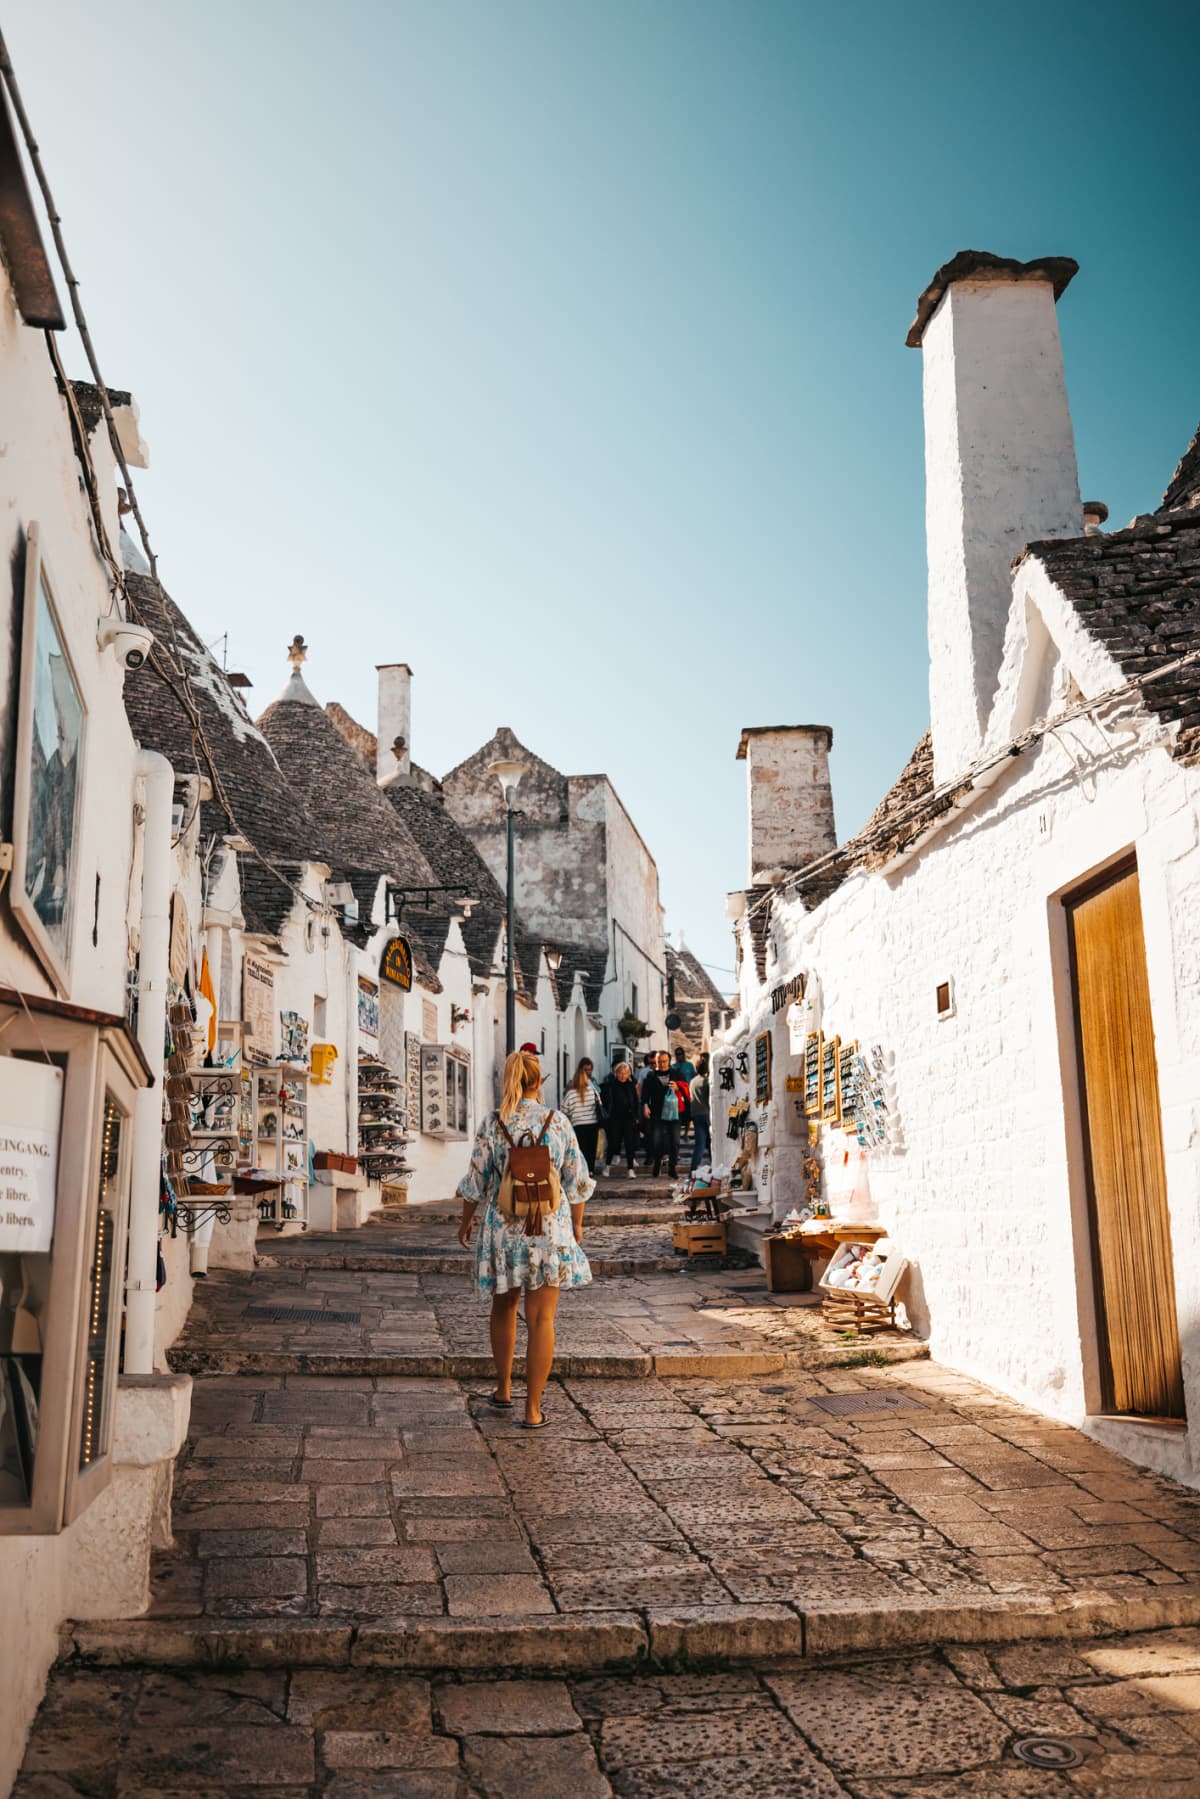 Rear view of woman walking in alley amidst trulli houses